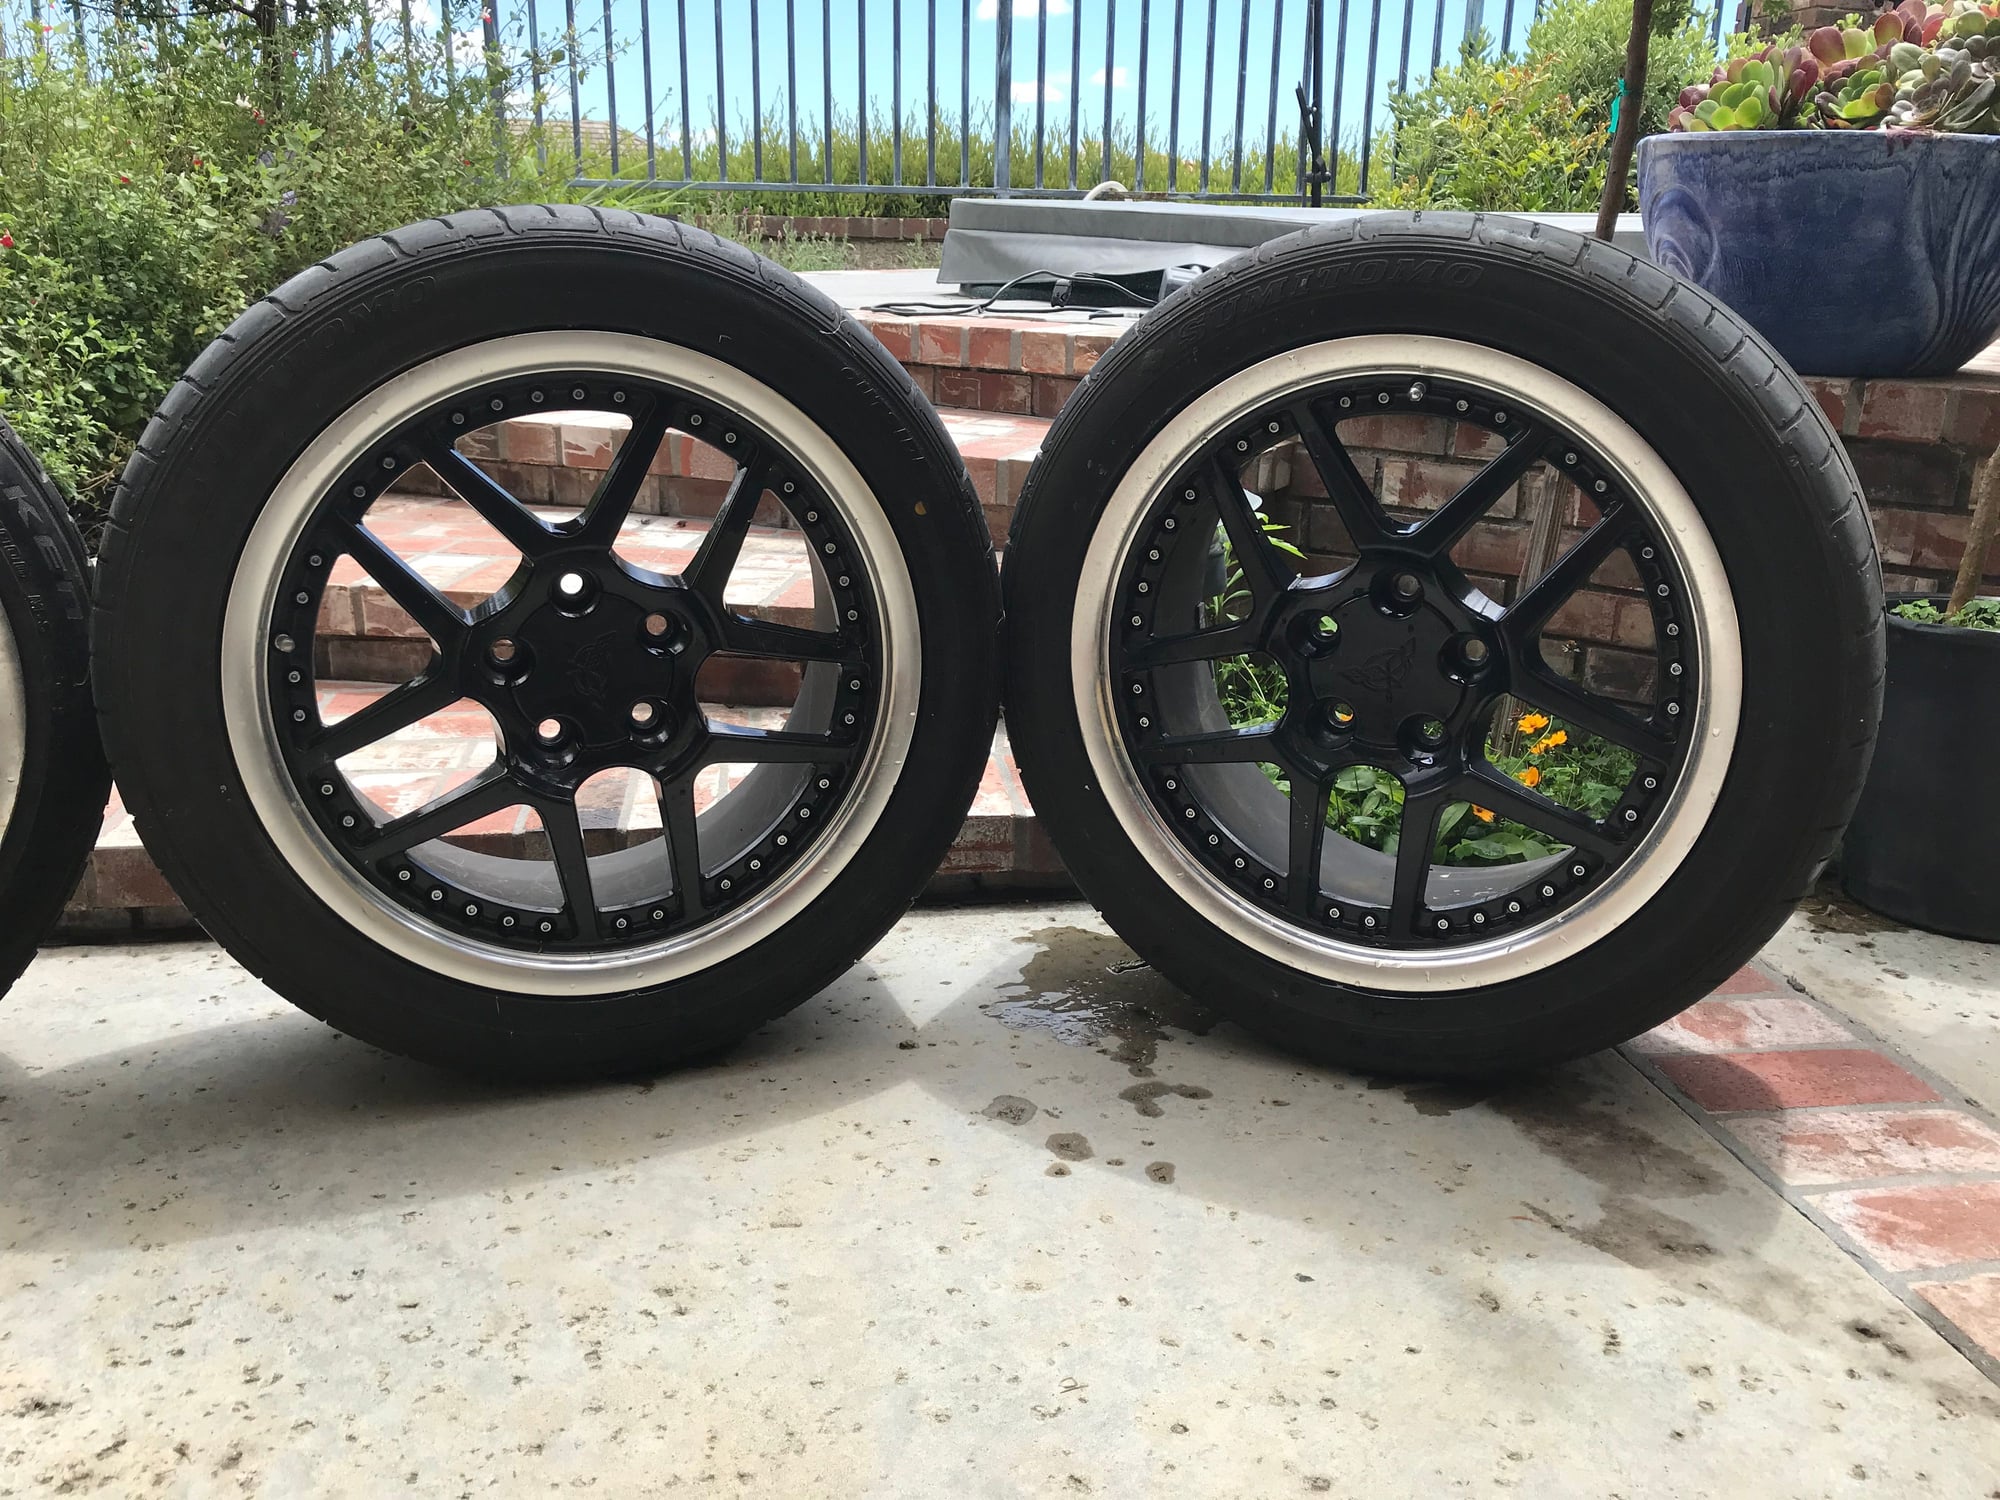  - C5 corvette 18" knock off wheels with tires- Mission Viejo ca - Mission Viejo, CA 92692, United States